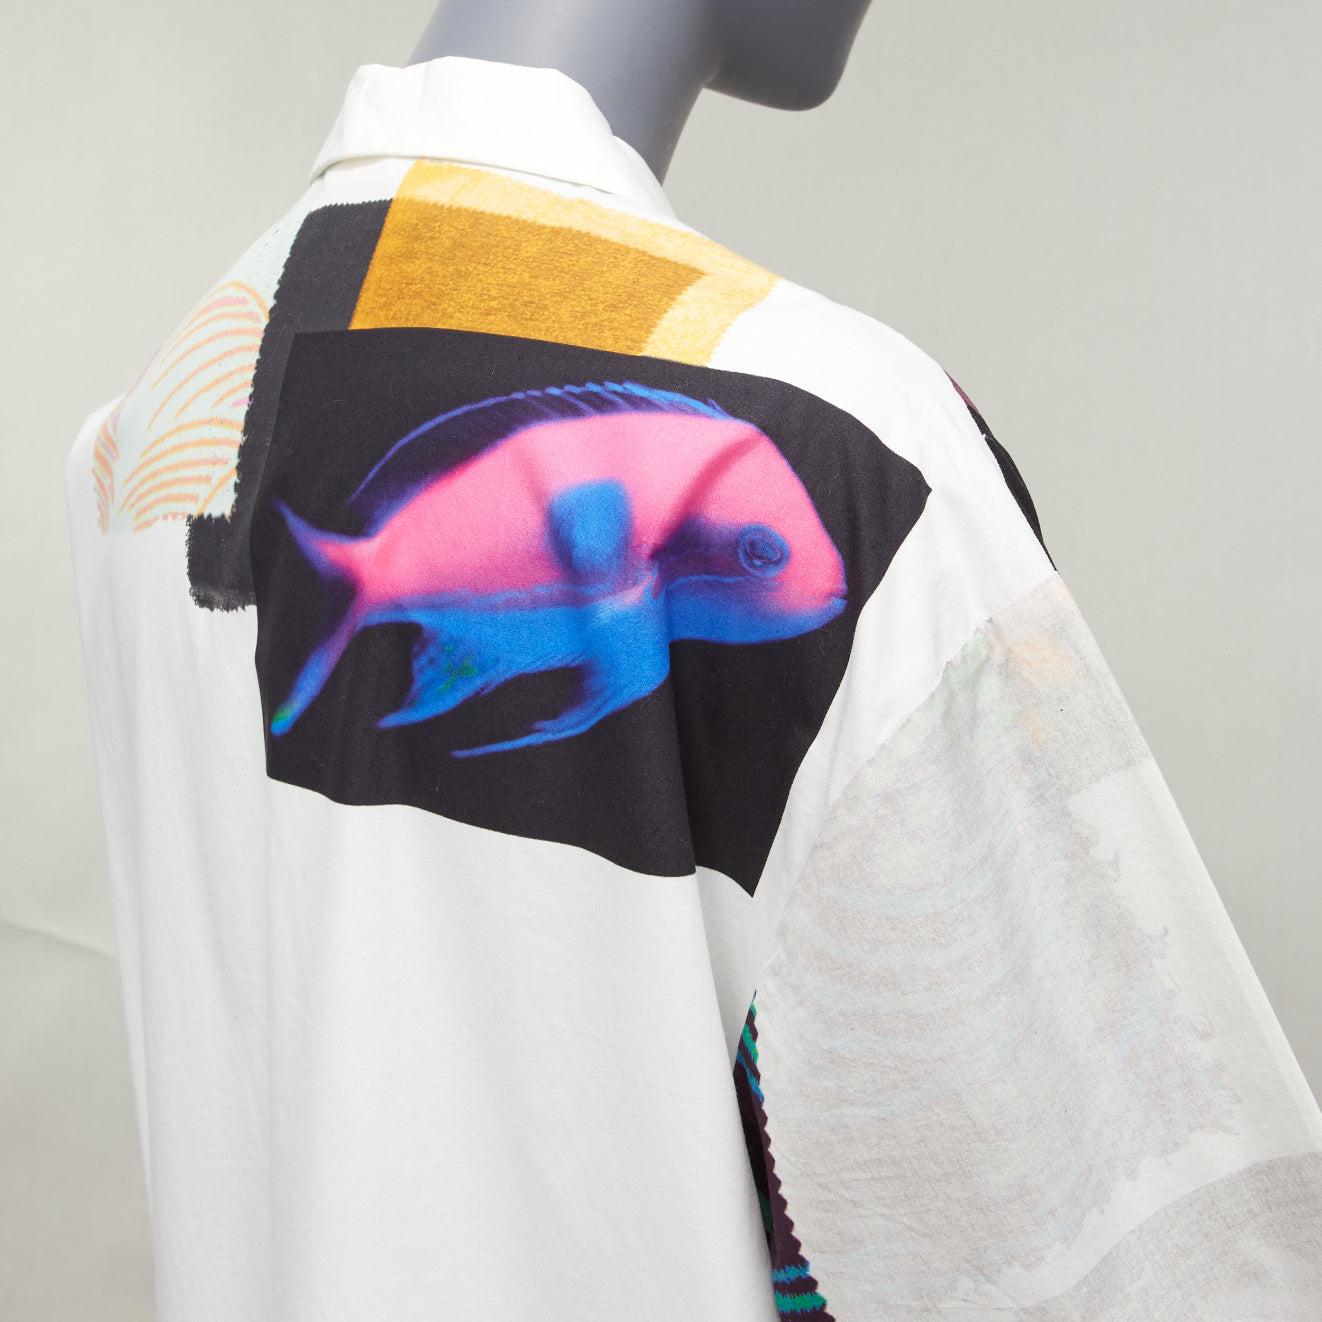 DRIES VAN NOTEN multicolour photographic patch print white shirt dress S
Reference: DYTG/A00033
Brand: Dries Van Noten
Material: Cotton
Color: White, Multicolour
Pattern: Photographic Print
Closure: Button
Extra Details: Hidden button stand.
Made